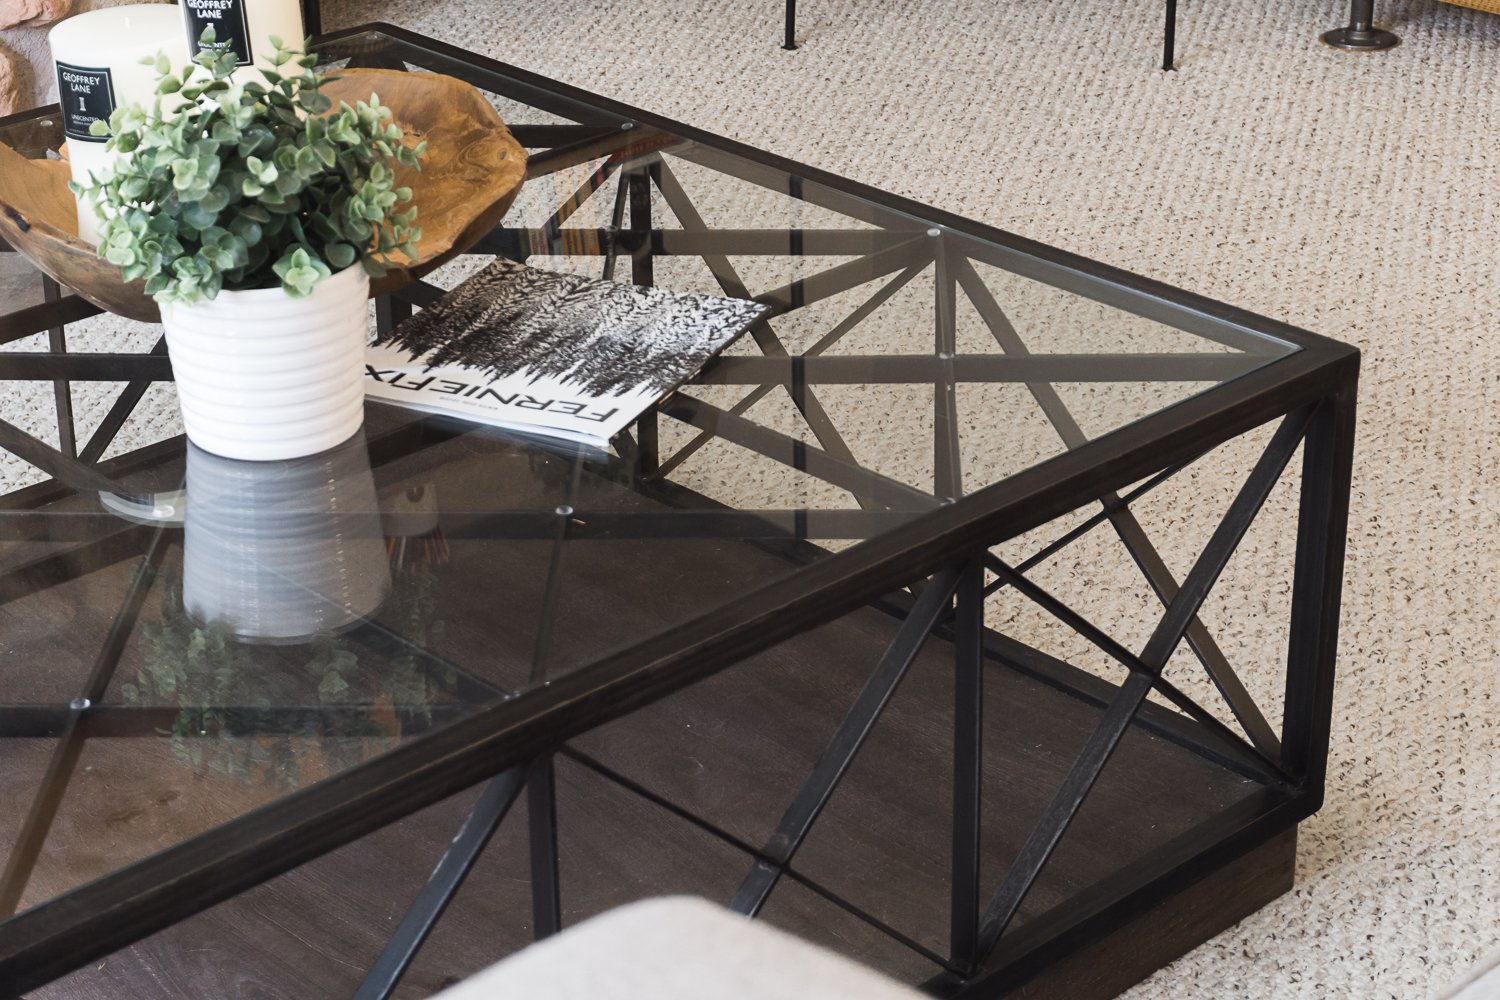 Shop online or in store. We carry a diverse collection of coffee and accent tables. Industrial, Mid-century, Modern Farmhouse, and contemporary styles, in a variety of materials